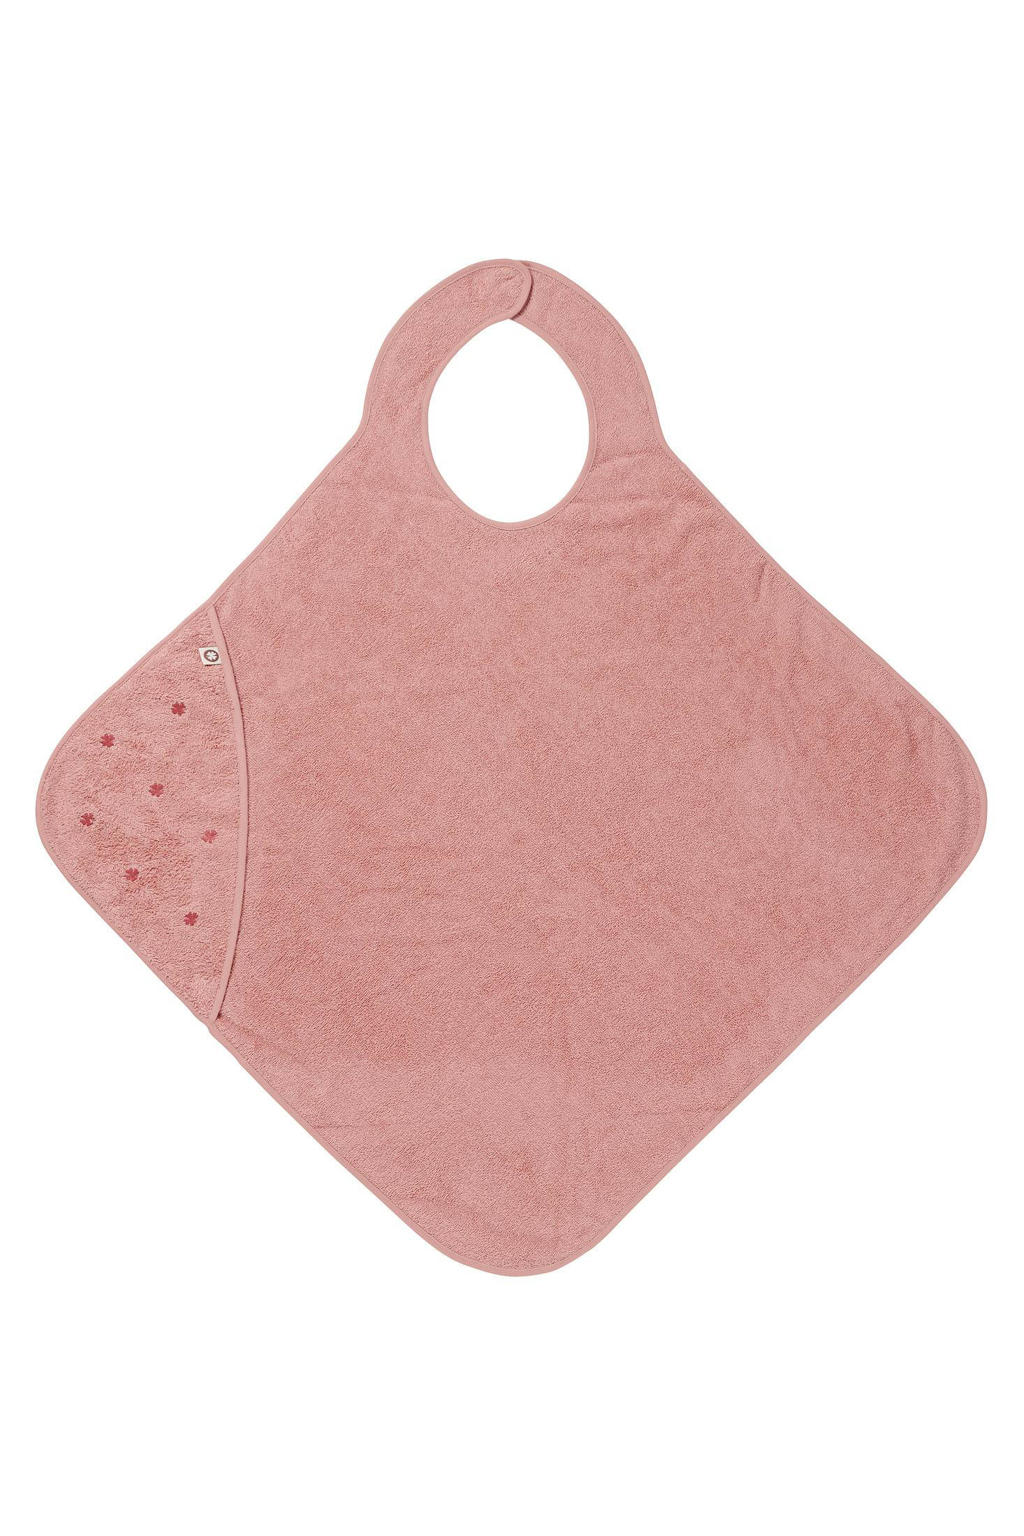 Noppies Baby Comfort Wearable Clover Terry badcape 105x110 cm Misty Rose